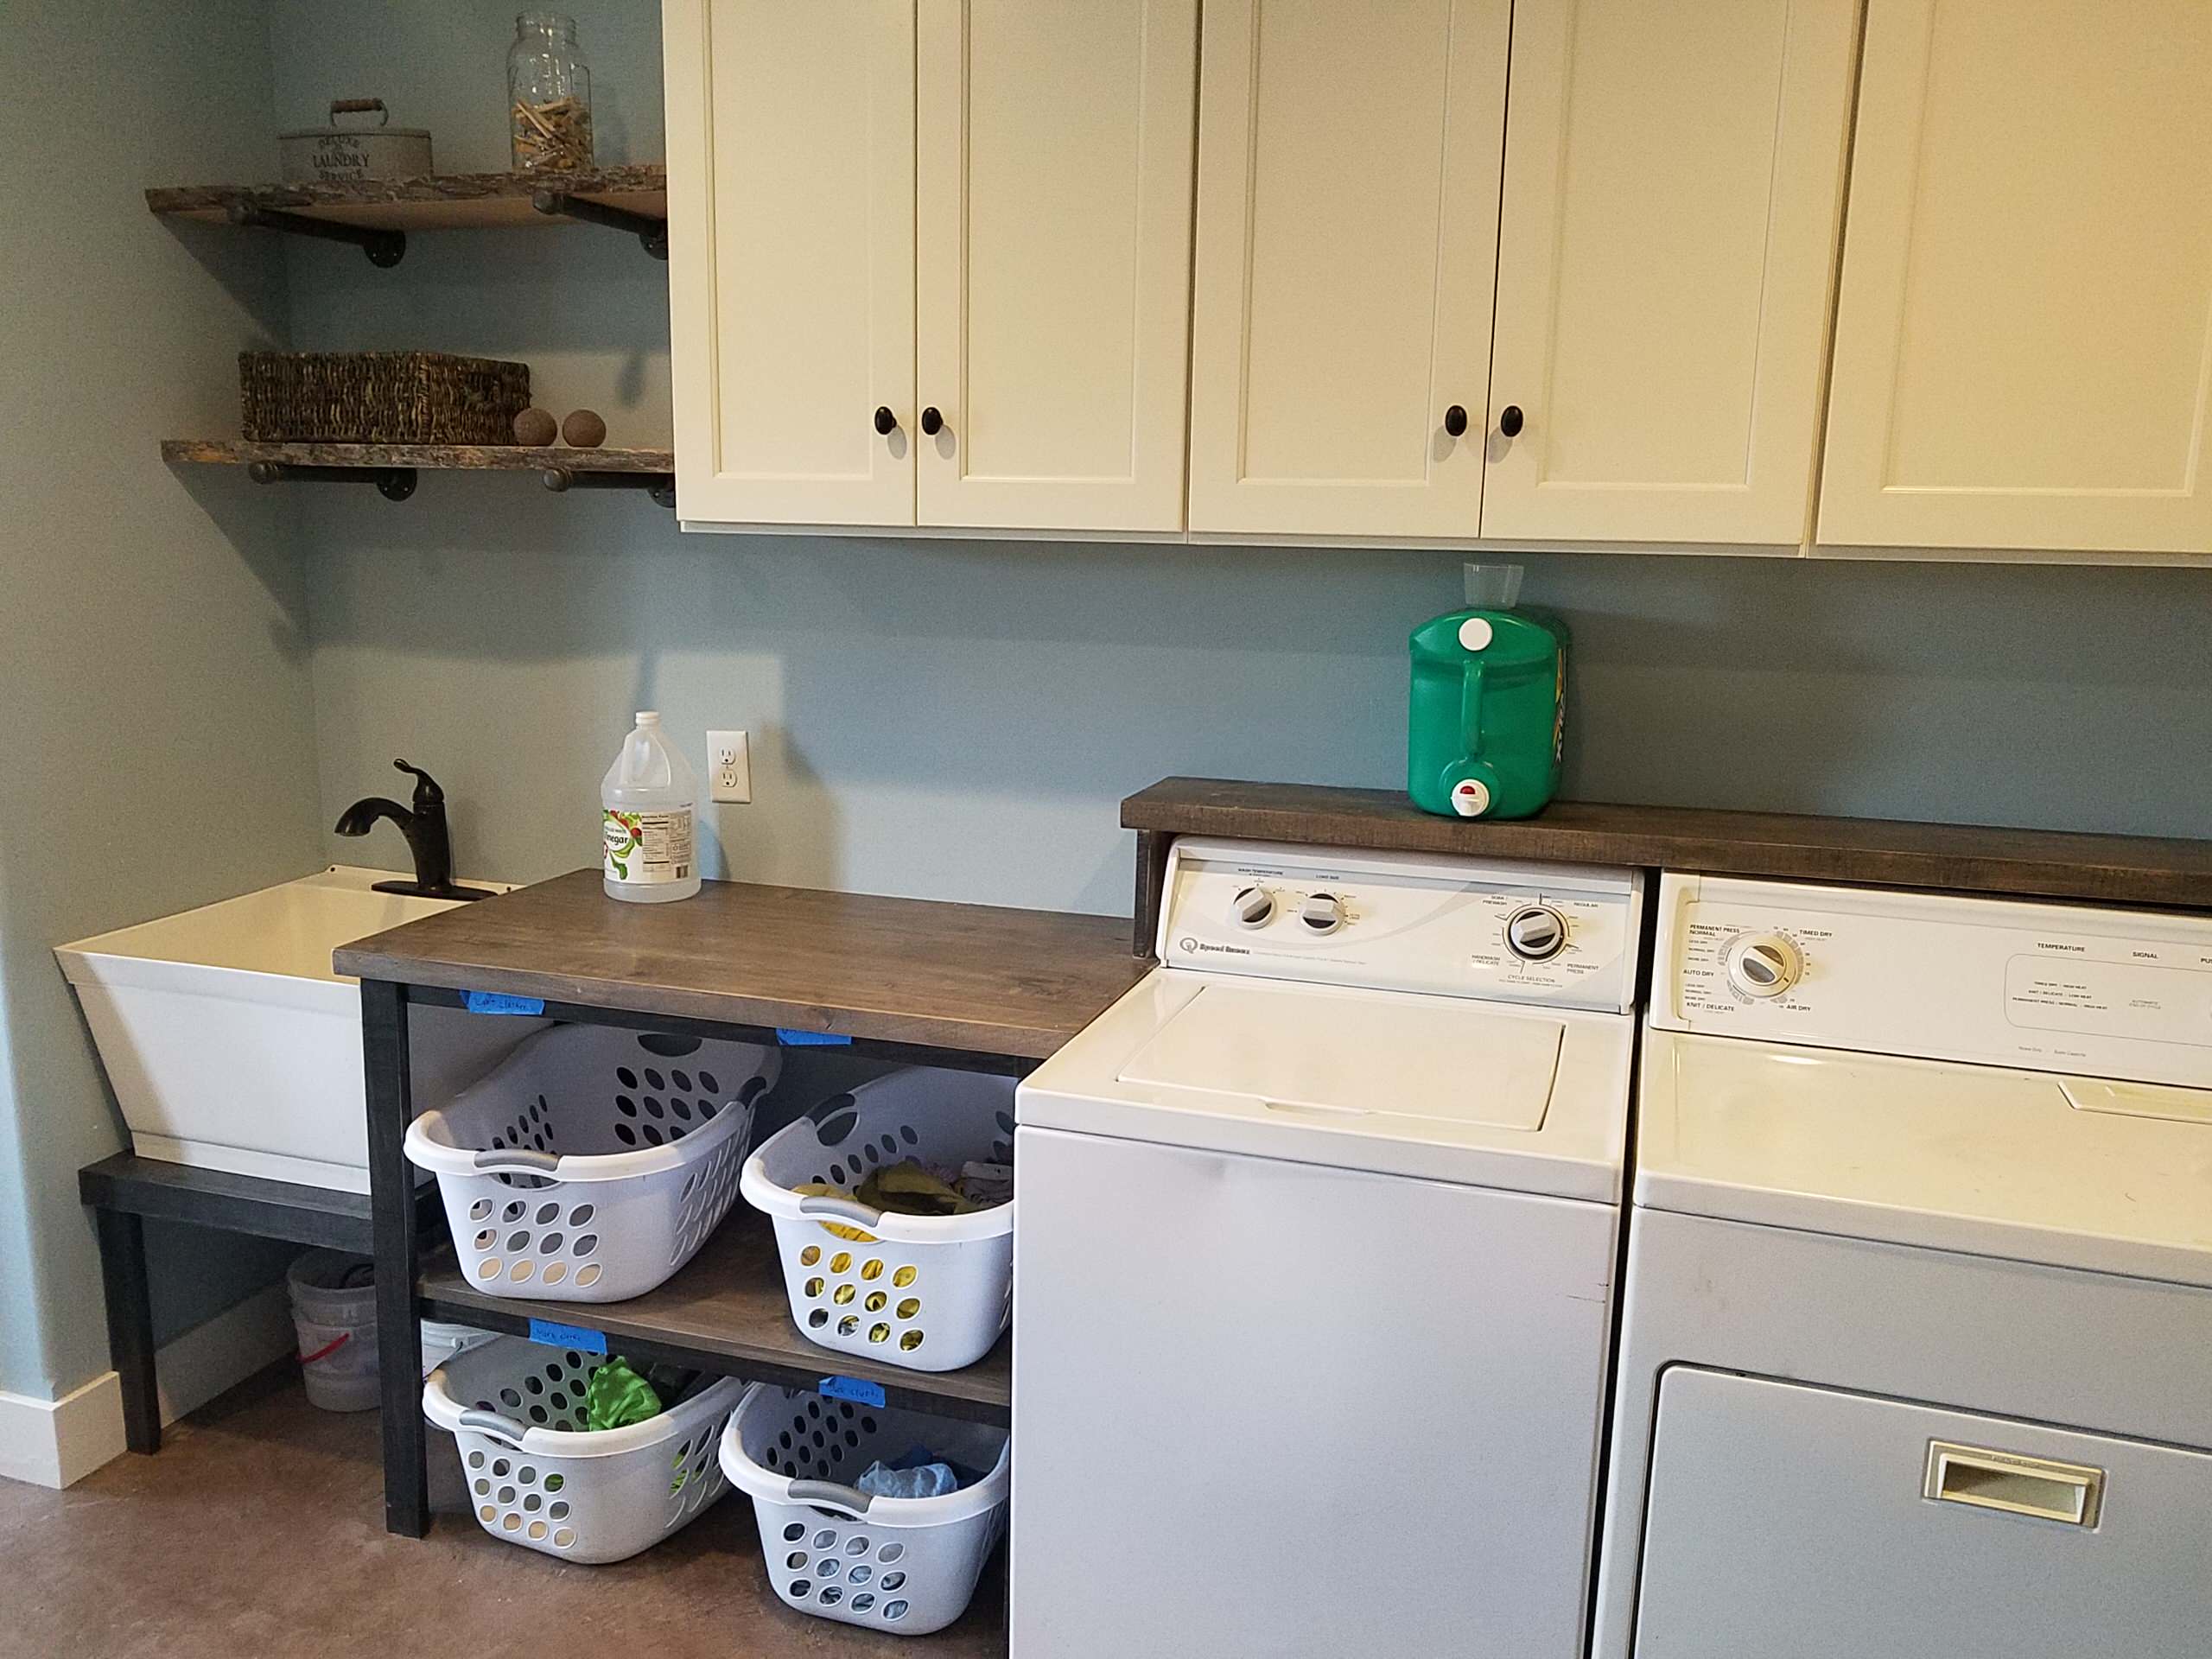 13 Laundry Room Sink Ideas You'll Want To Copy